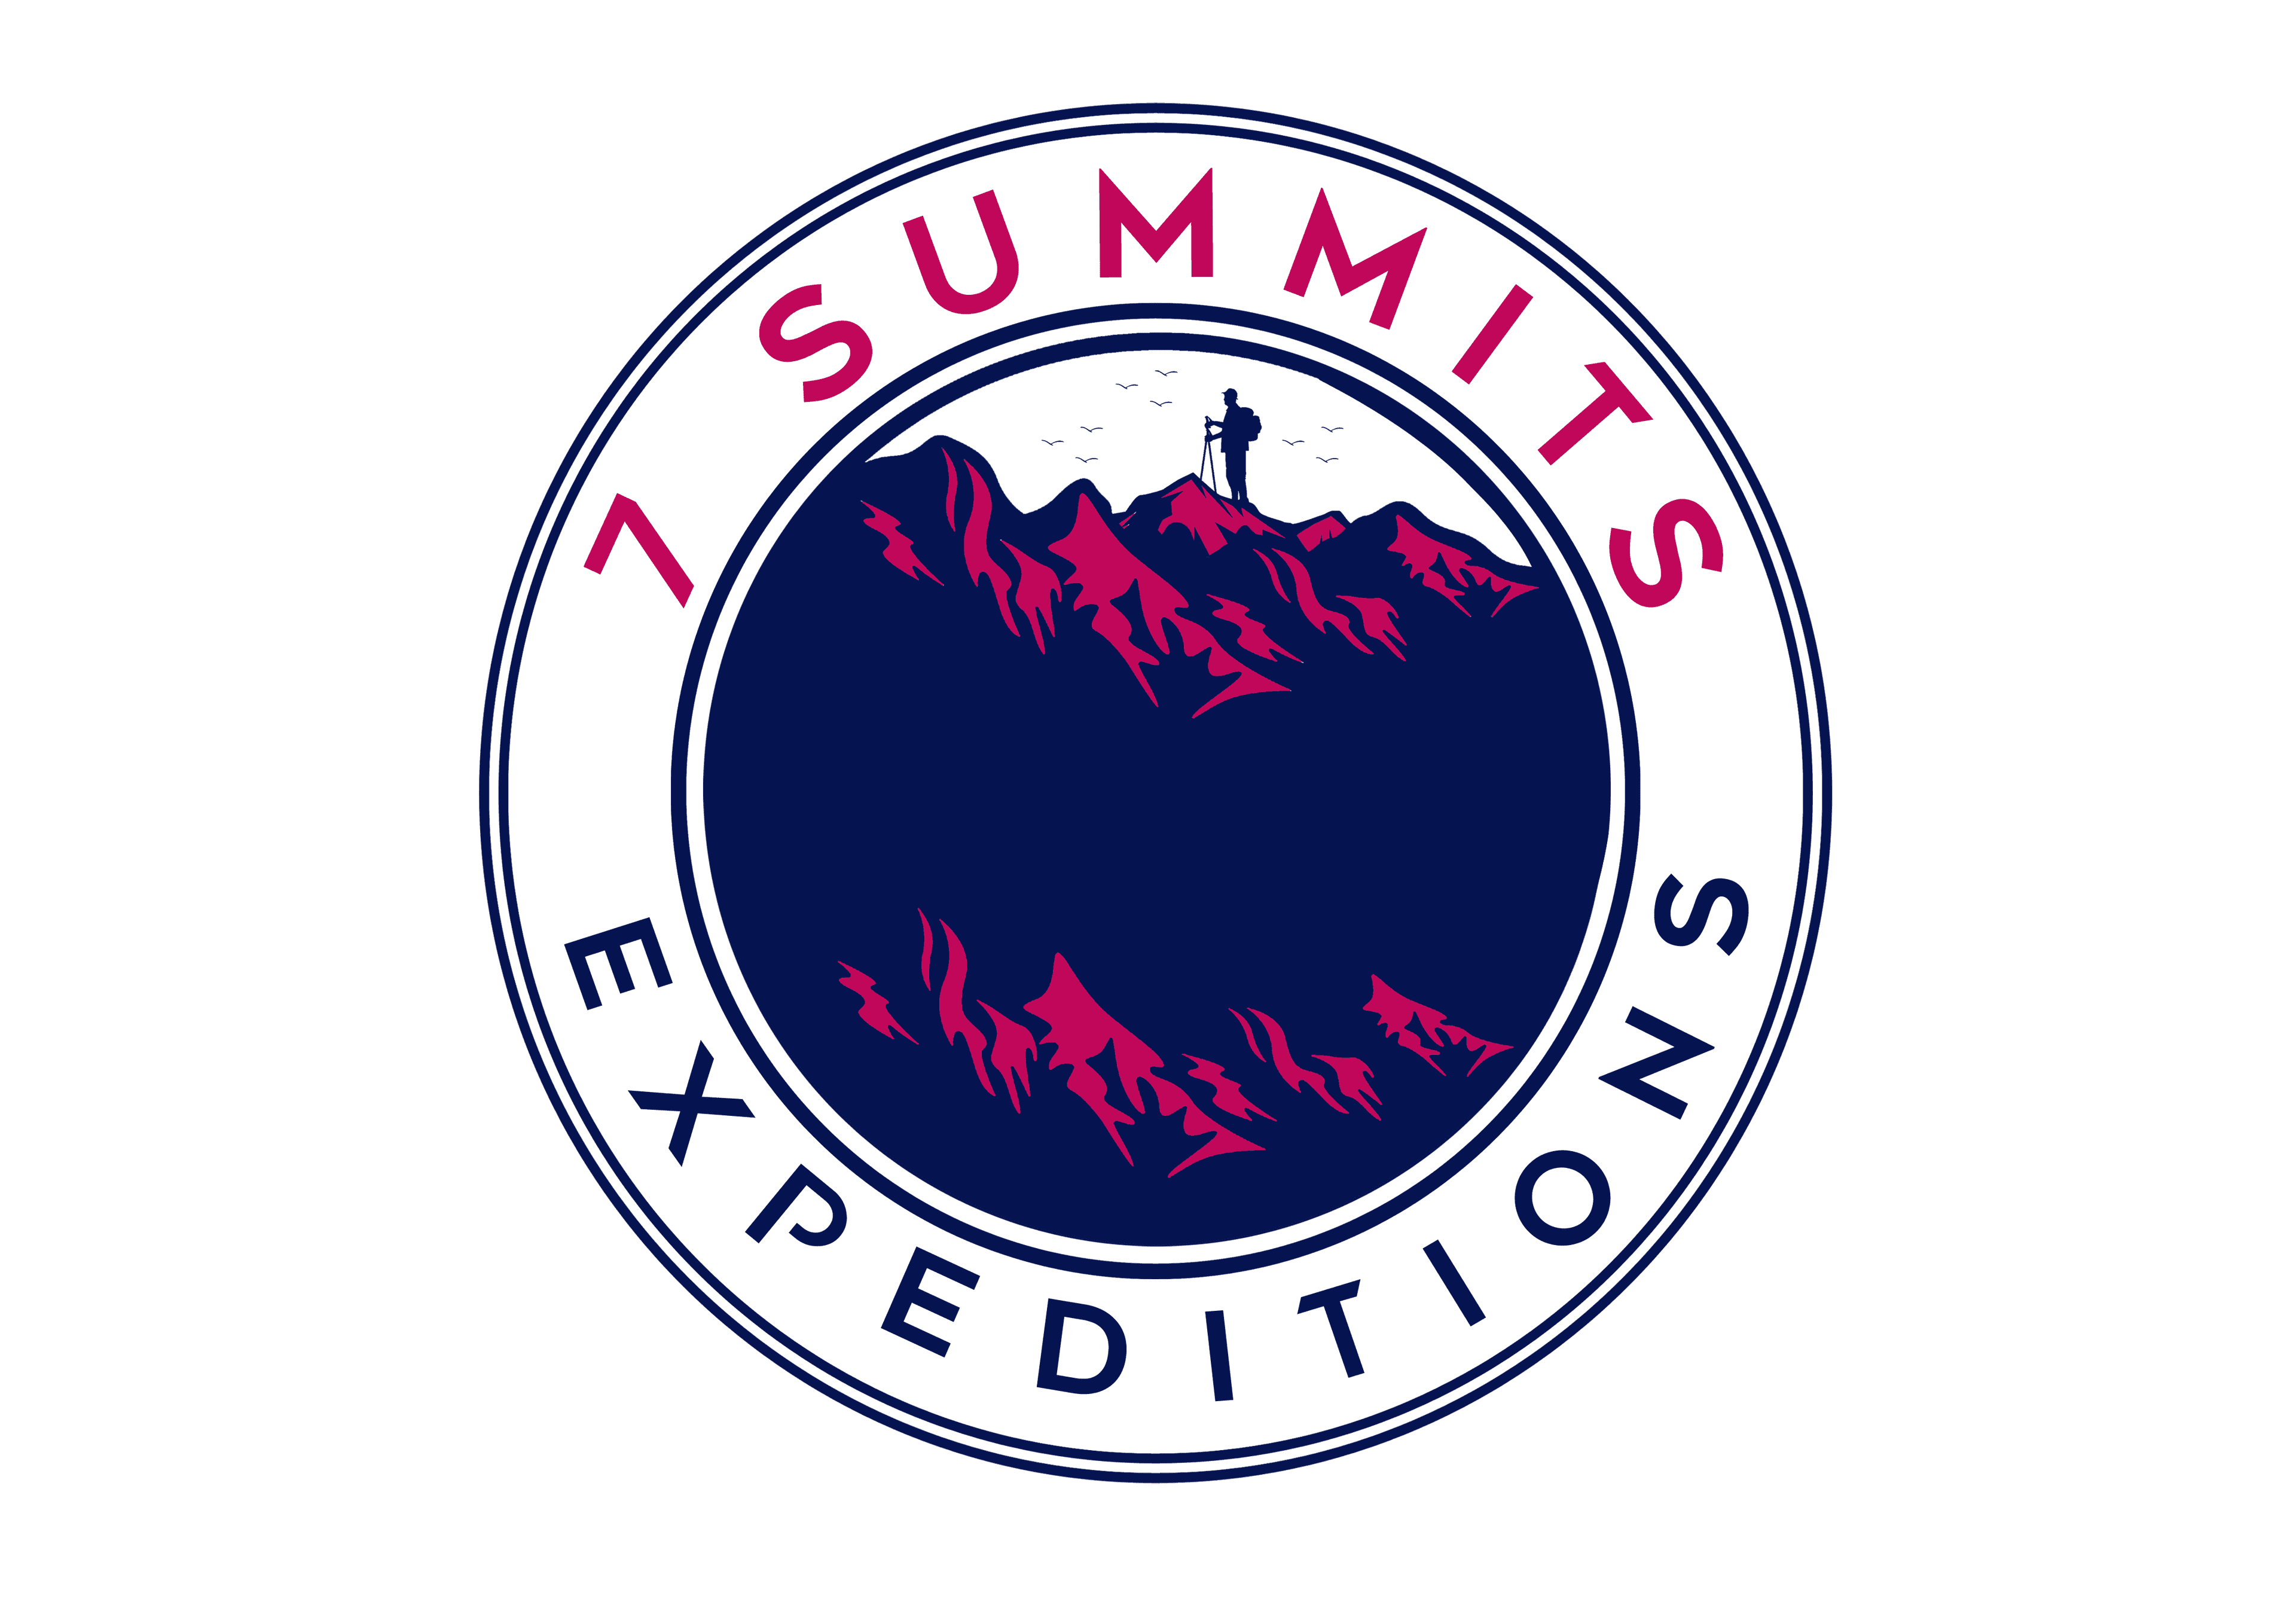 7 Summits Expeditions 